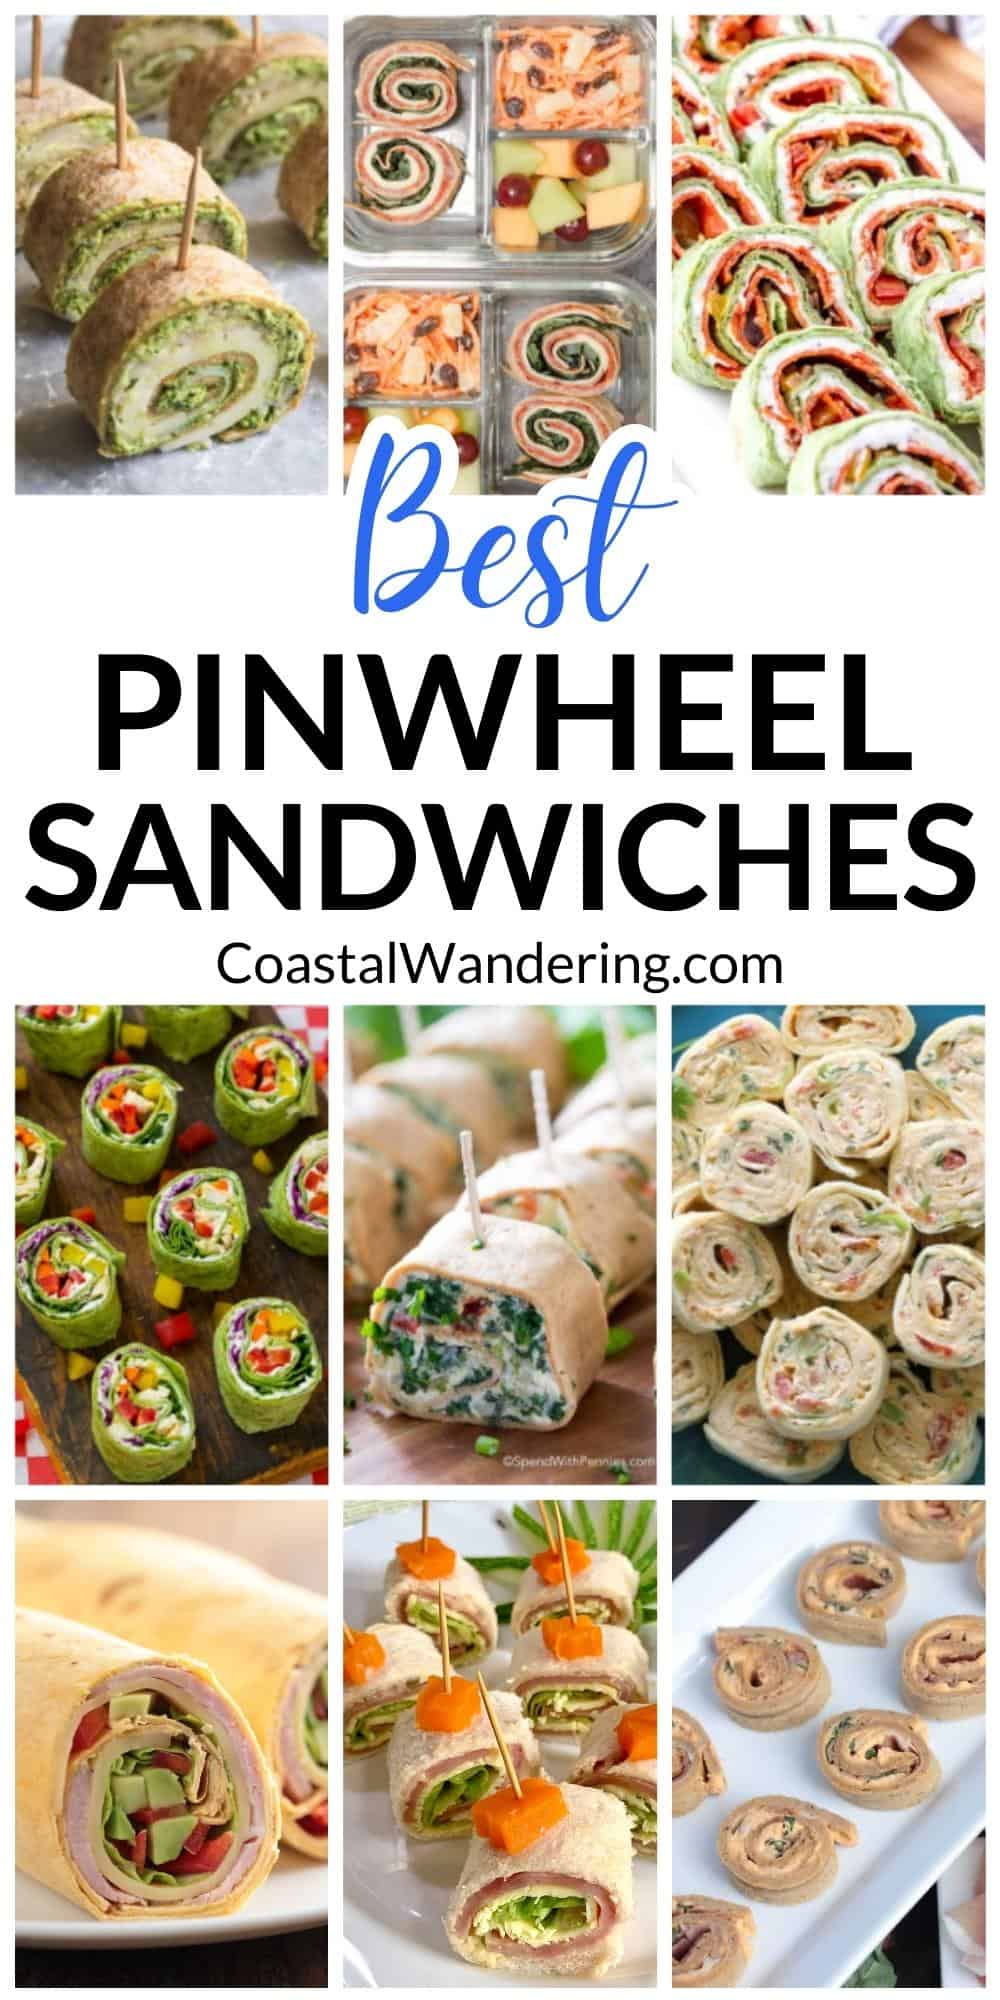 25 Easy Pinwheel Sandwiches Recipes For Lunch or Party Appetizers ...